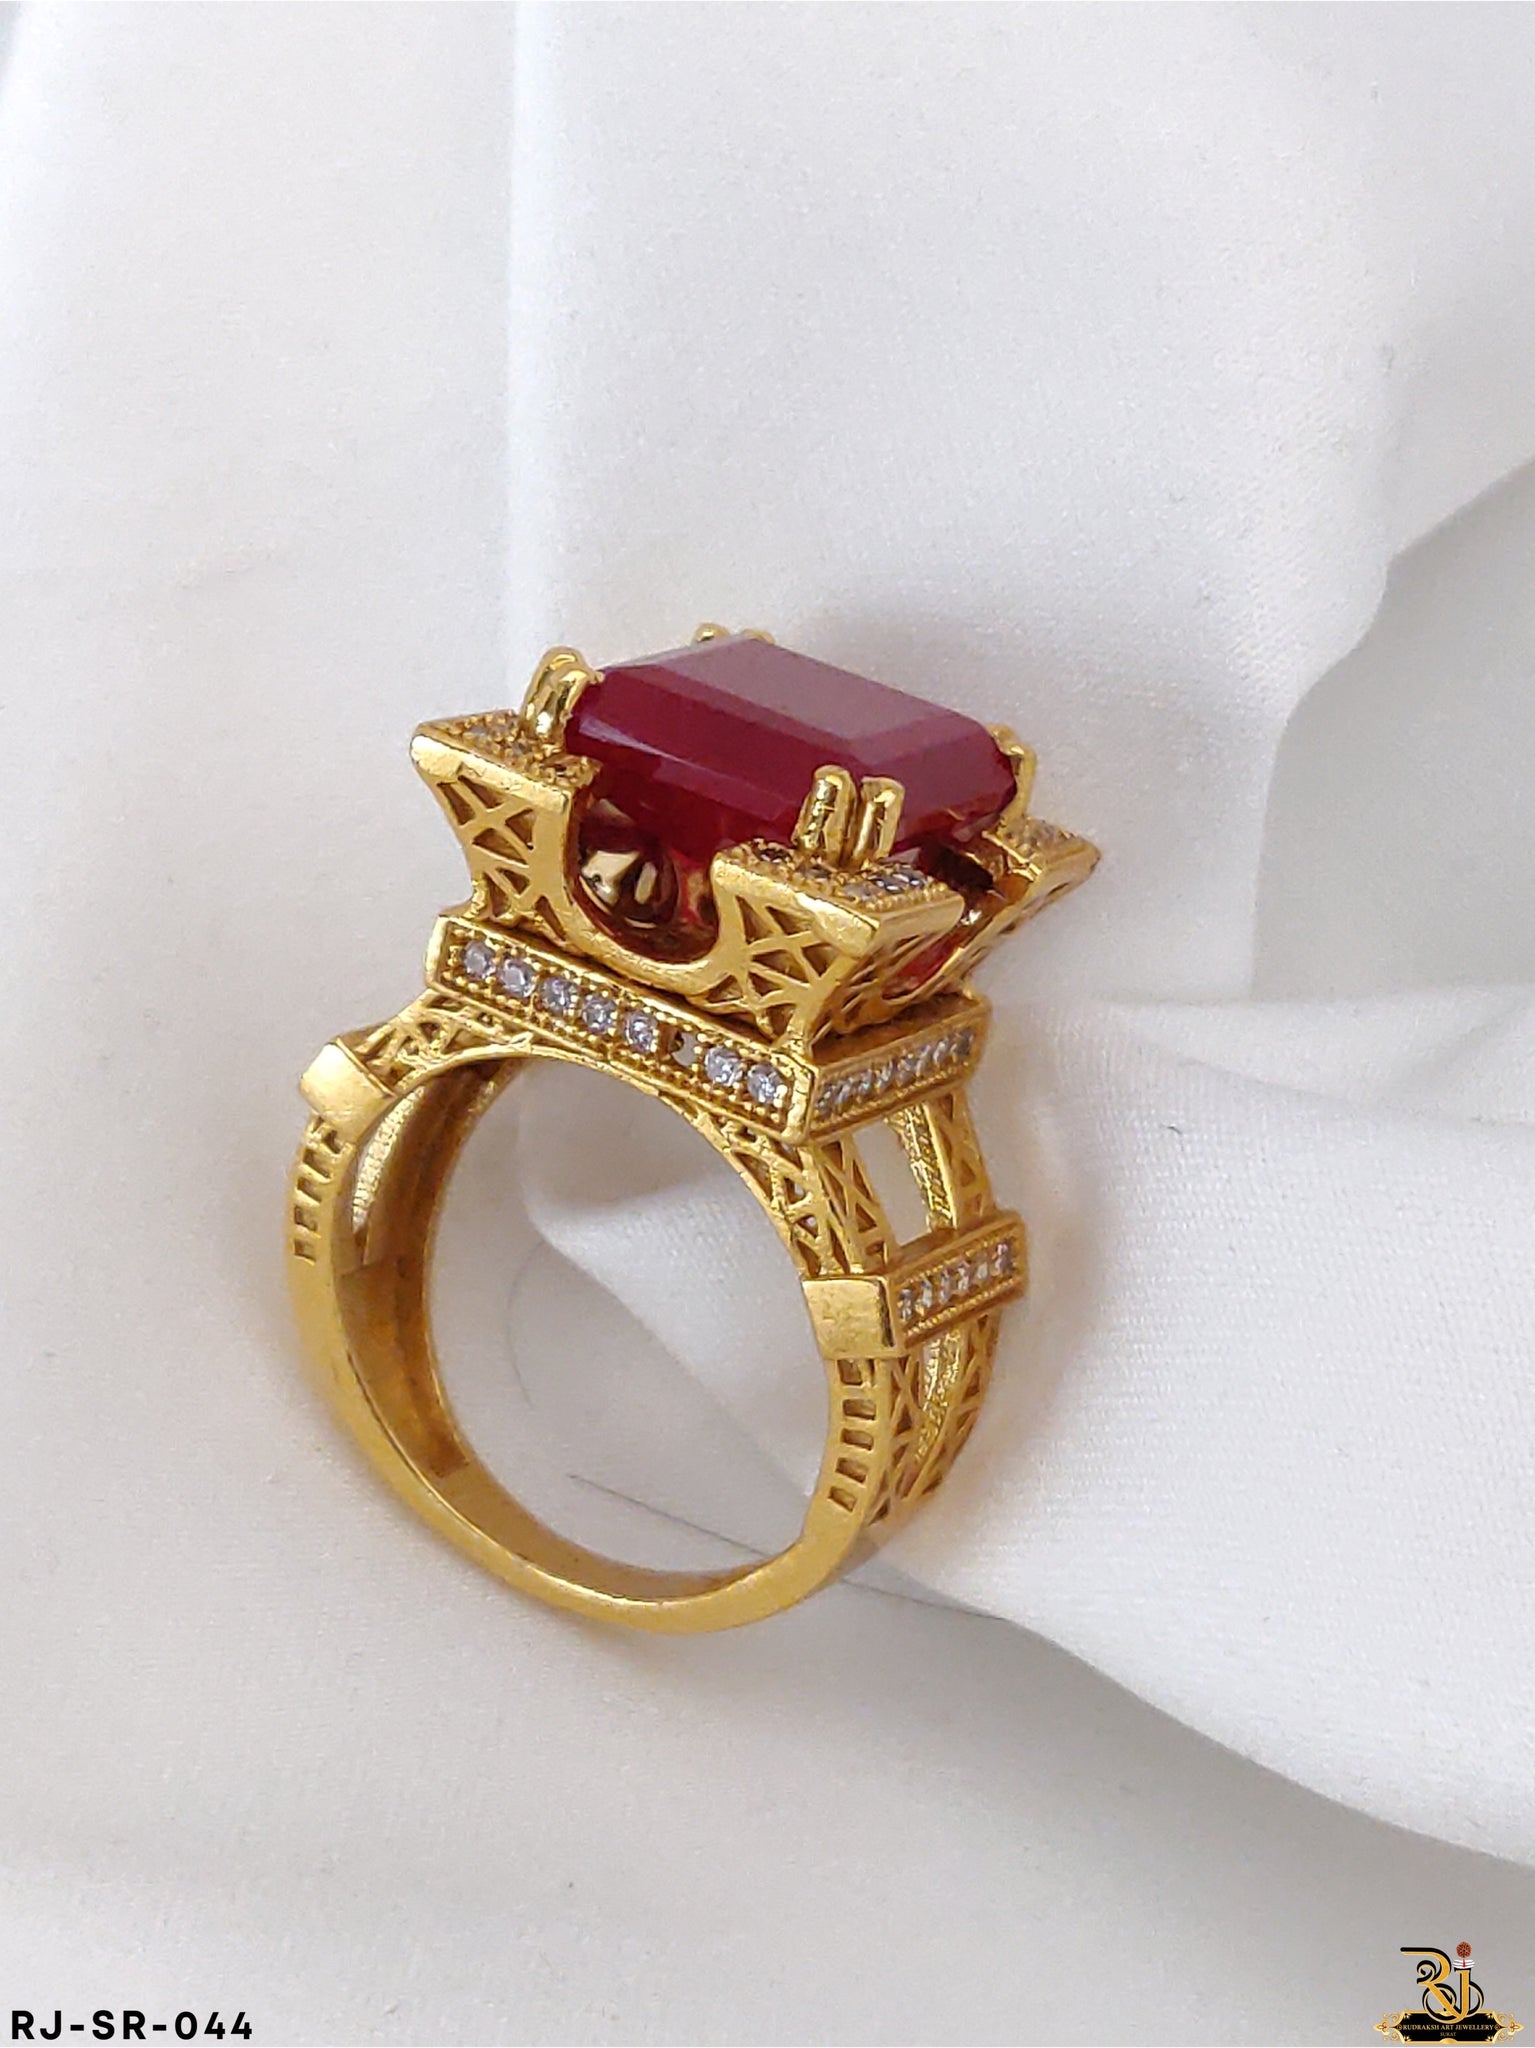 Buy quality New Fancy Design Gold Ring For Men in Ahmedabad